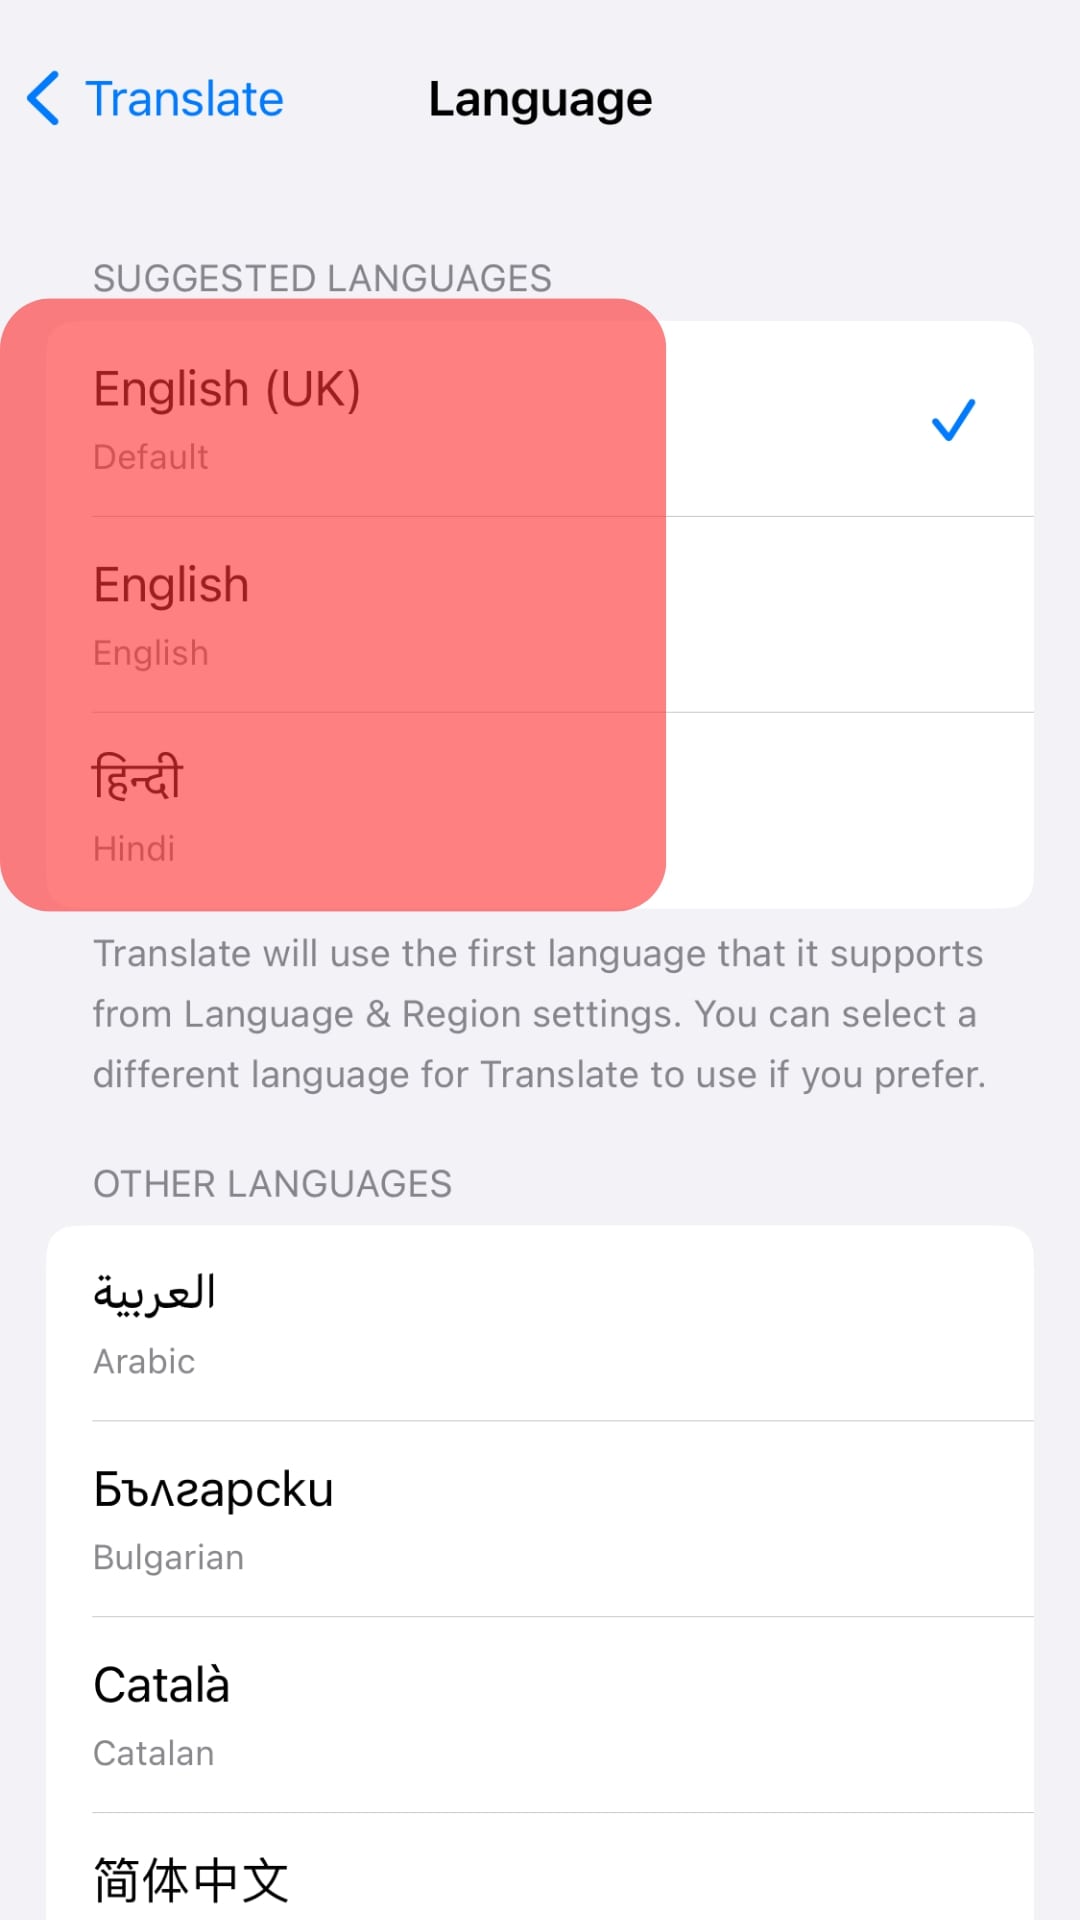 Select The Languages You Want To Translate To And From.